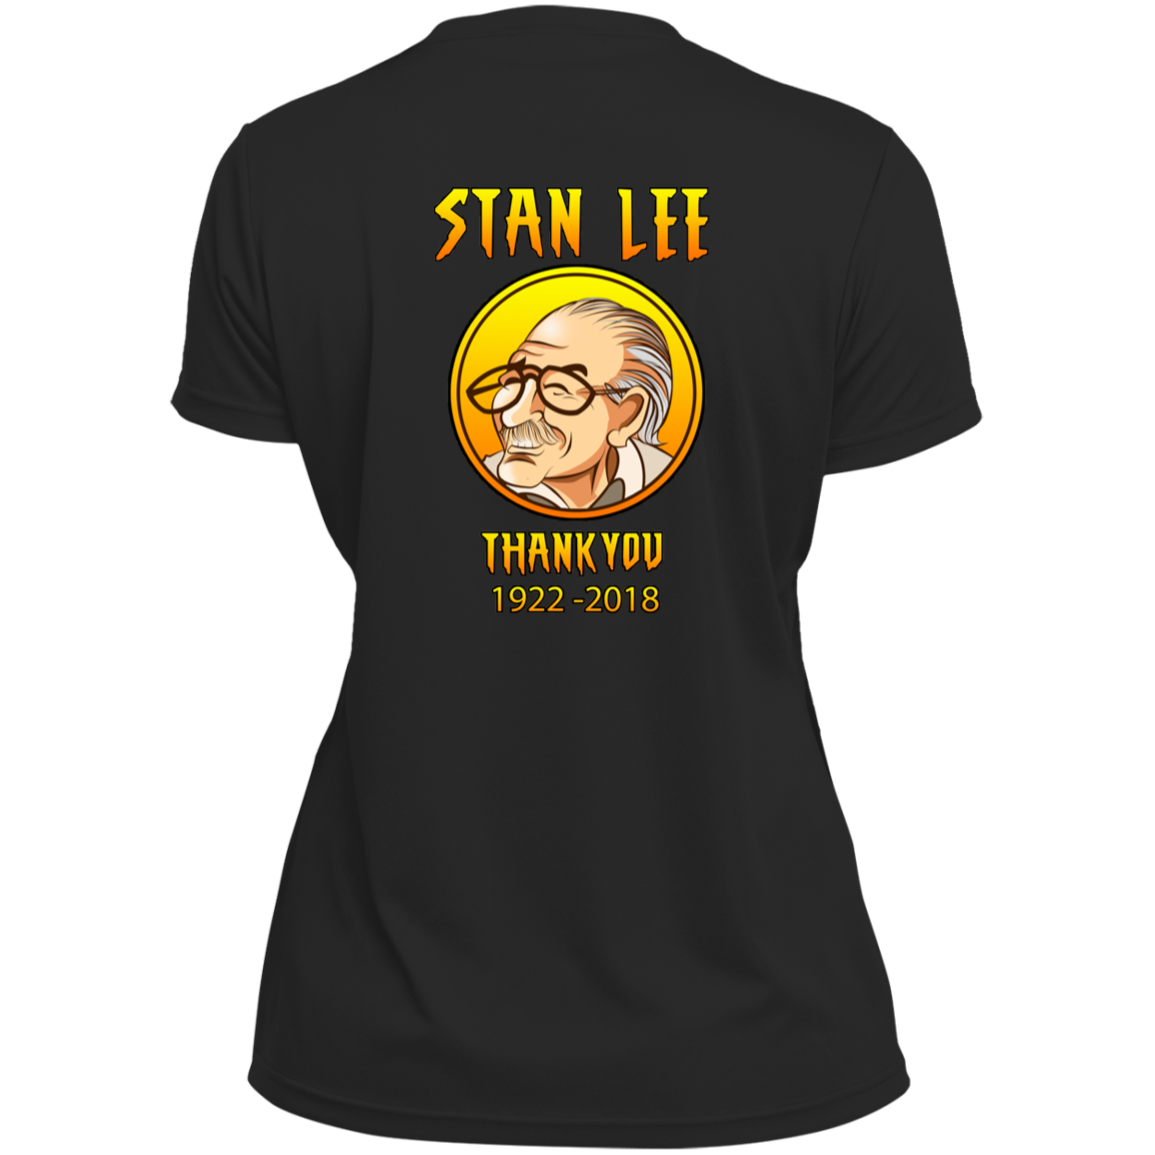 ArtichokeUSA Character and Font design. Stan Lee Thank You Fan Art. Let's Create Your Own Design Today. Ladies’ Moisture-Wicking V-Neck Tee